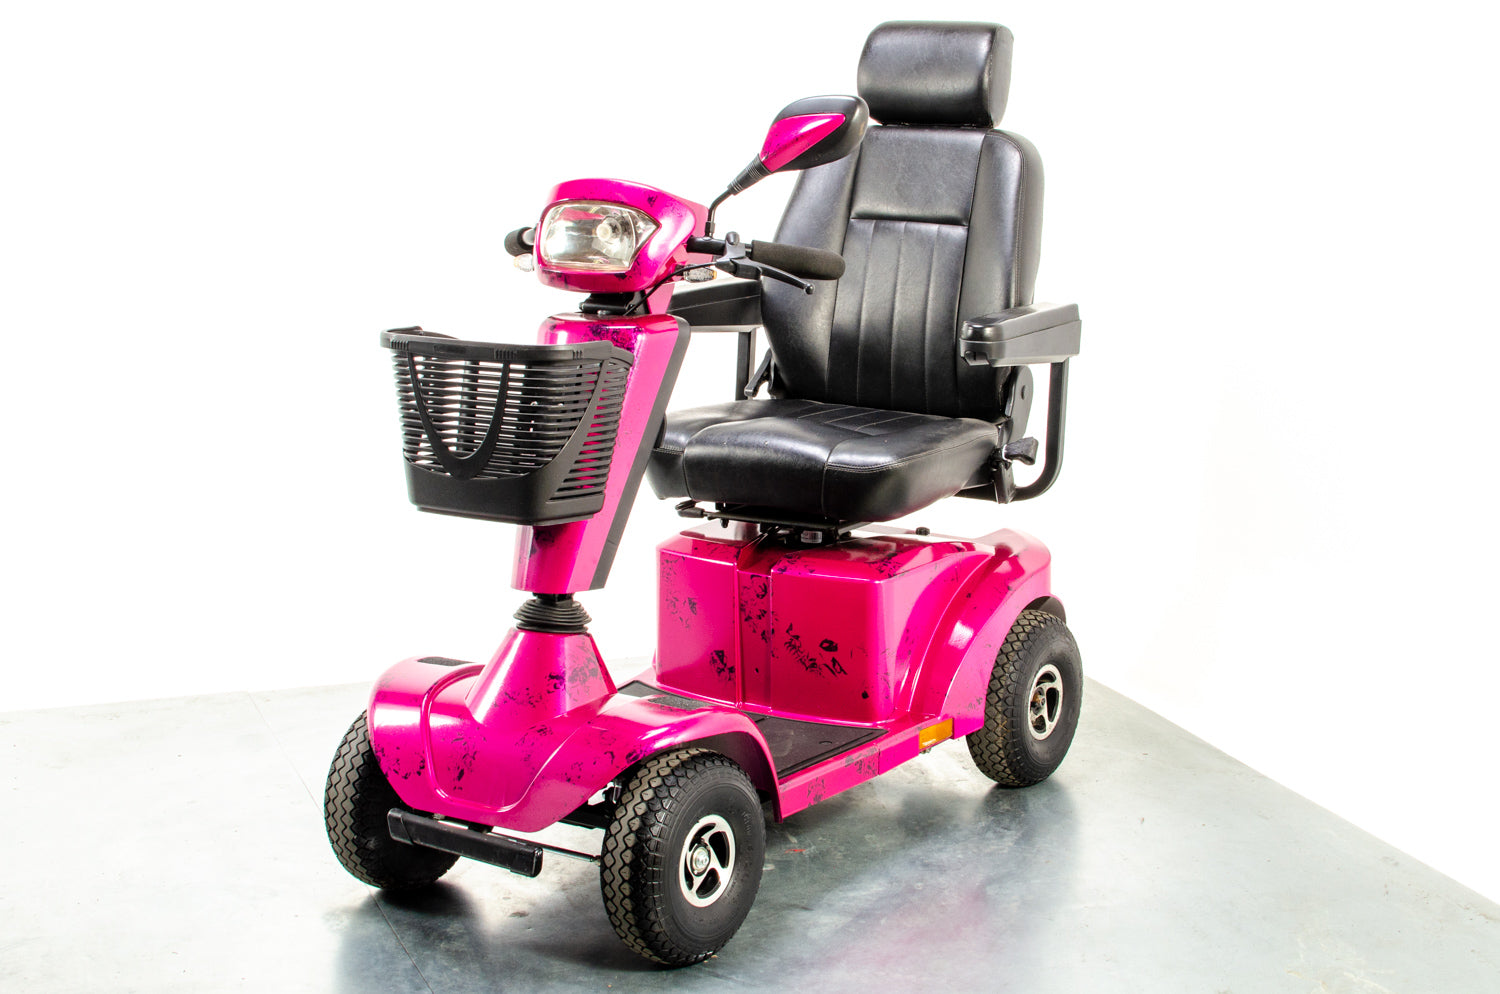 Sunrise Medical Sterling S425 Used Mobility Scooter 8mph Pink Midsize Pneumatic Pavement